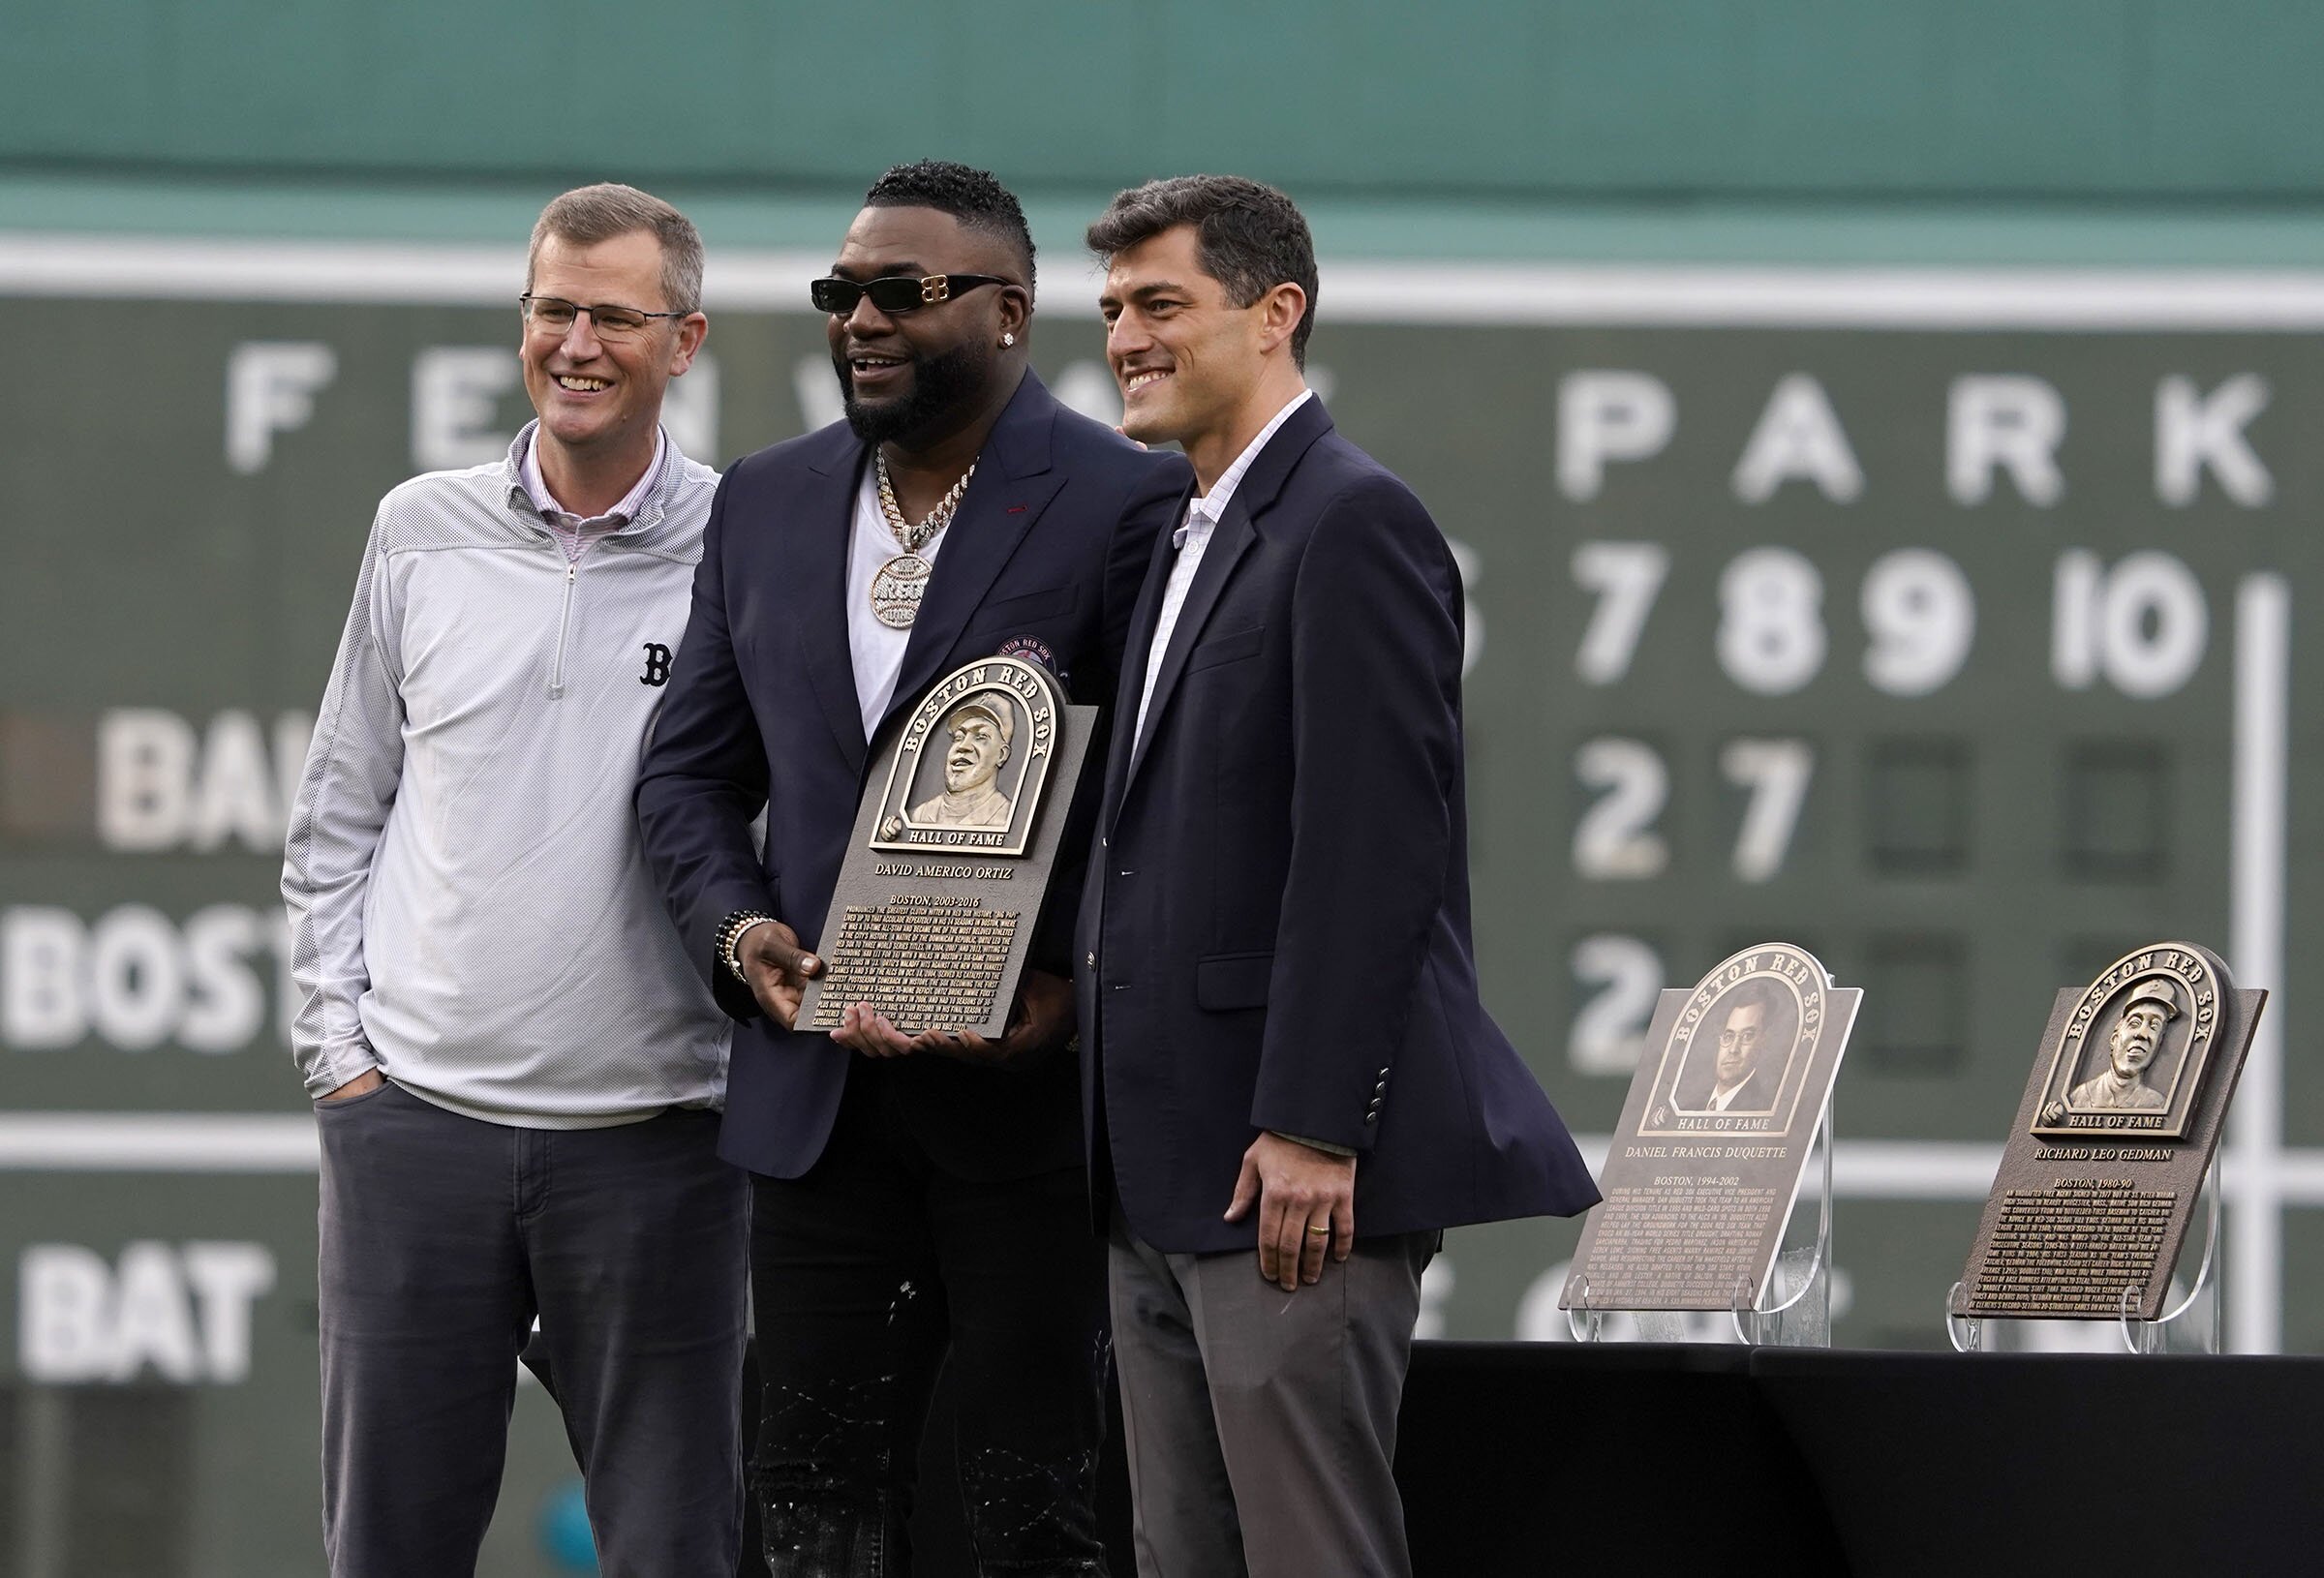 A very big honor': Big Papi inducted into Red Sox Hall of Fame - Boston  News, Weather, Sports